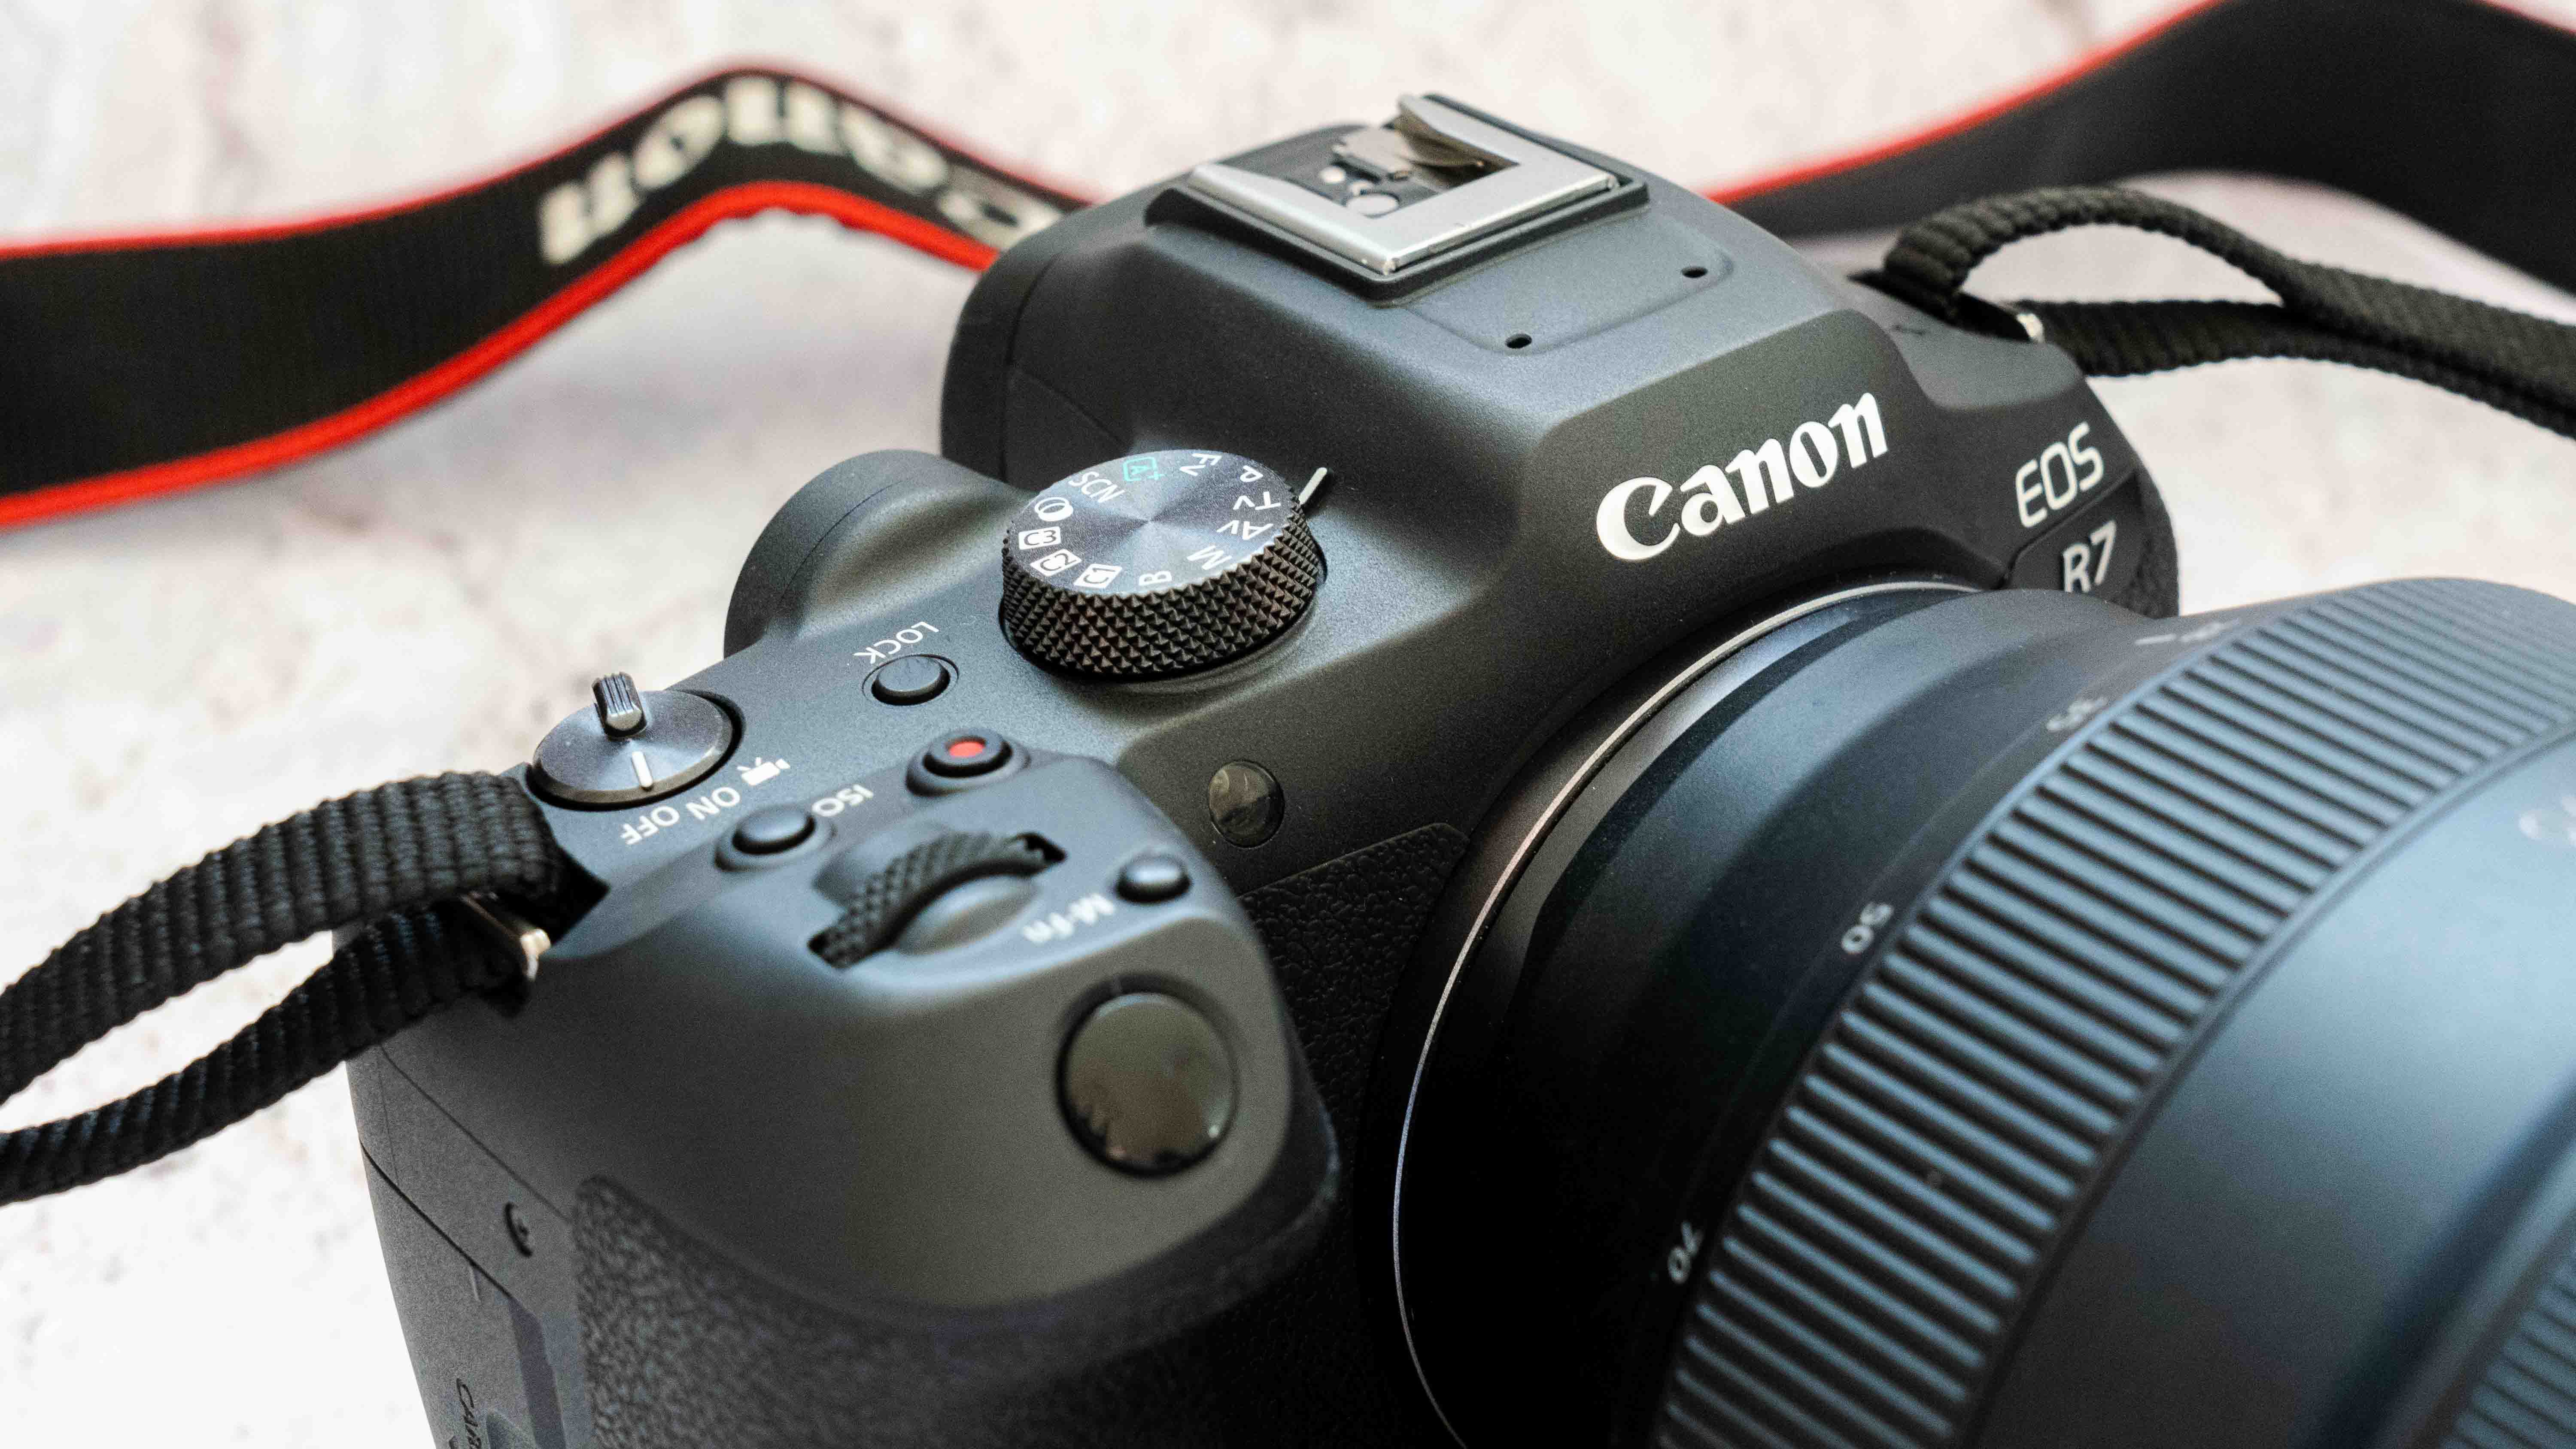 Canon EOS R7 Review: One of the Best Cameras Canon Makes